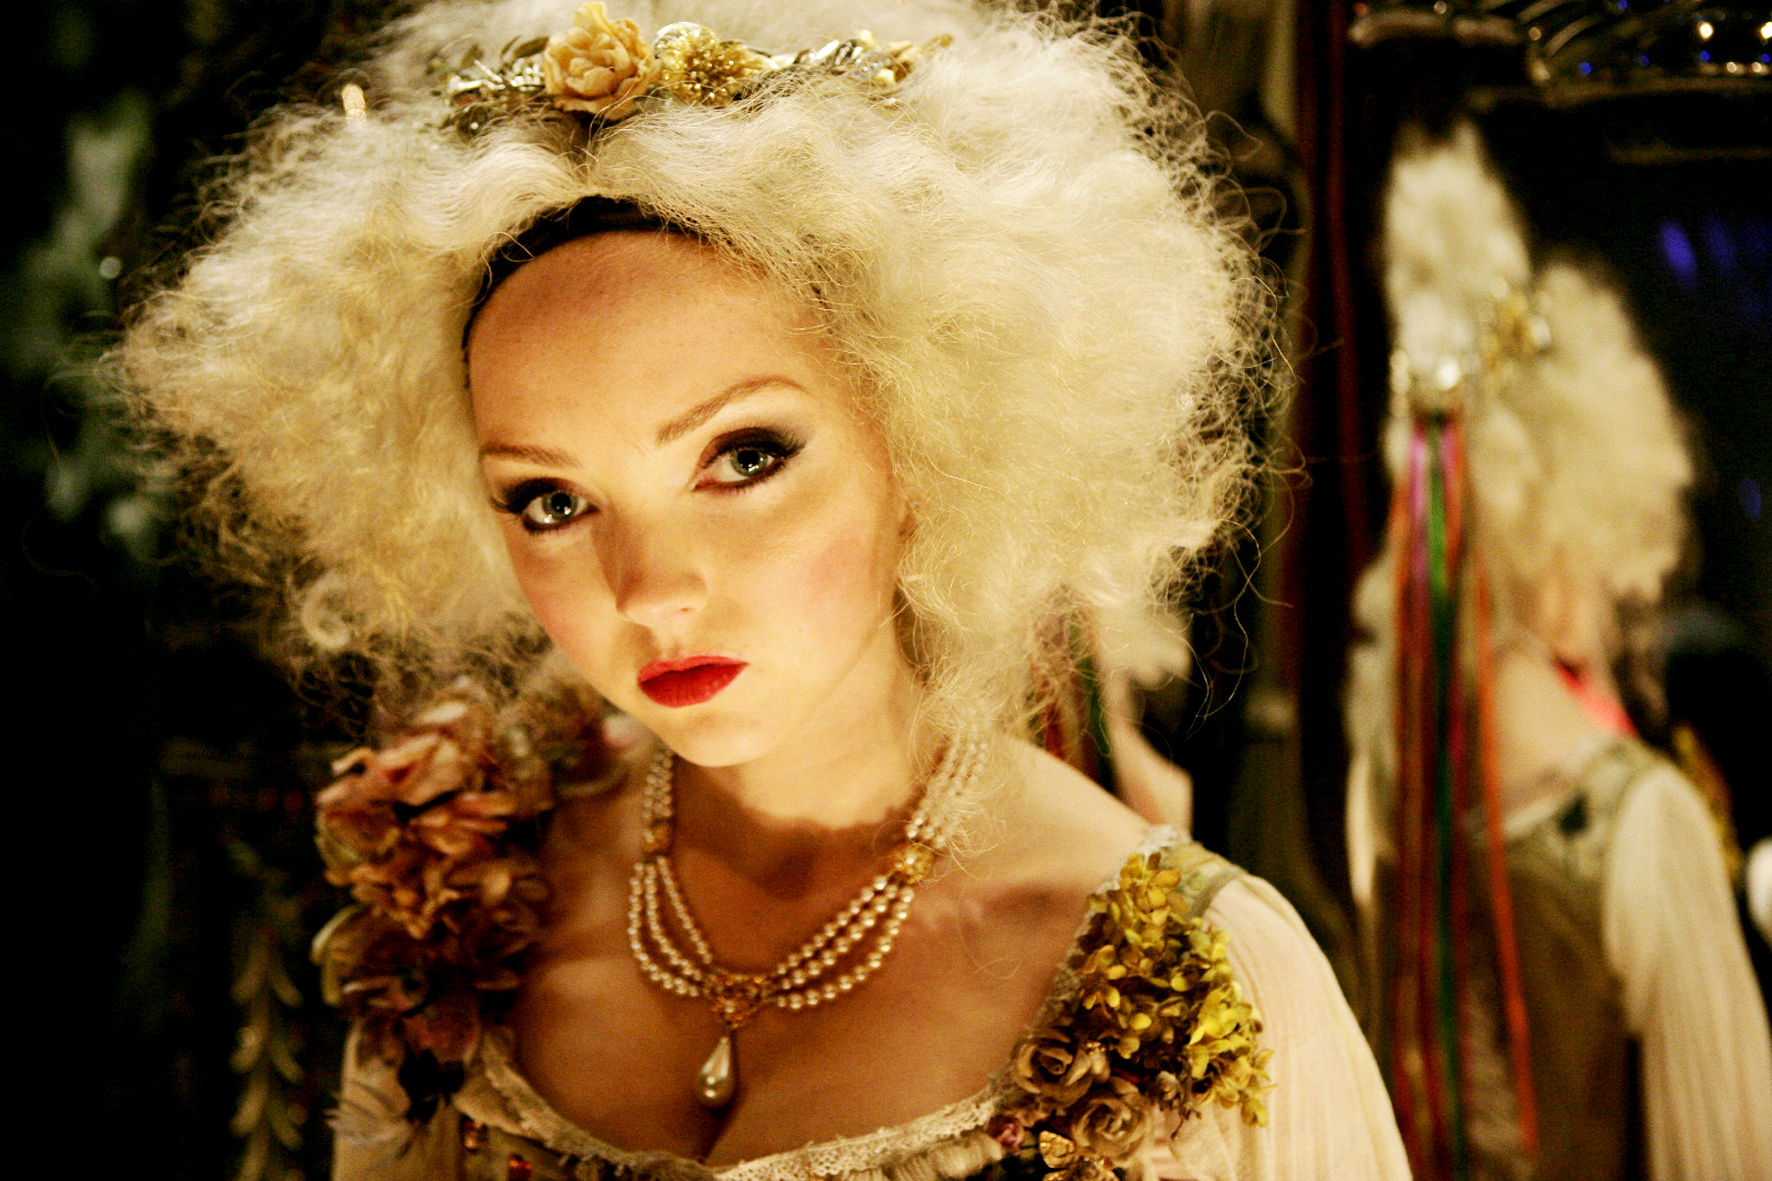 Lily Cole stars as Valentina in Sony Pictures Classics' The Imaginarium of Doctor Parnassus (2009)